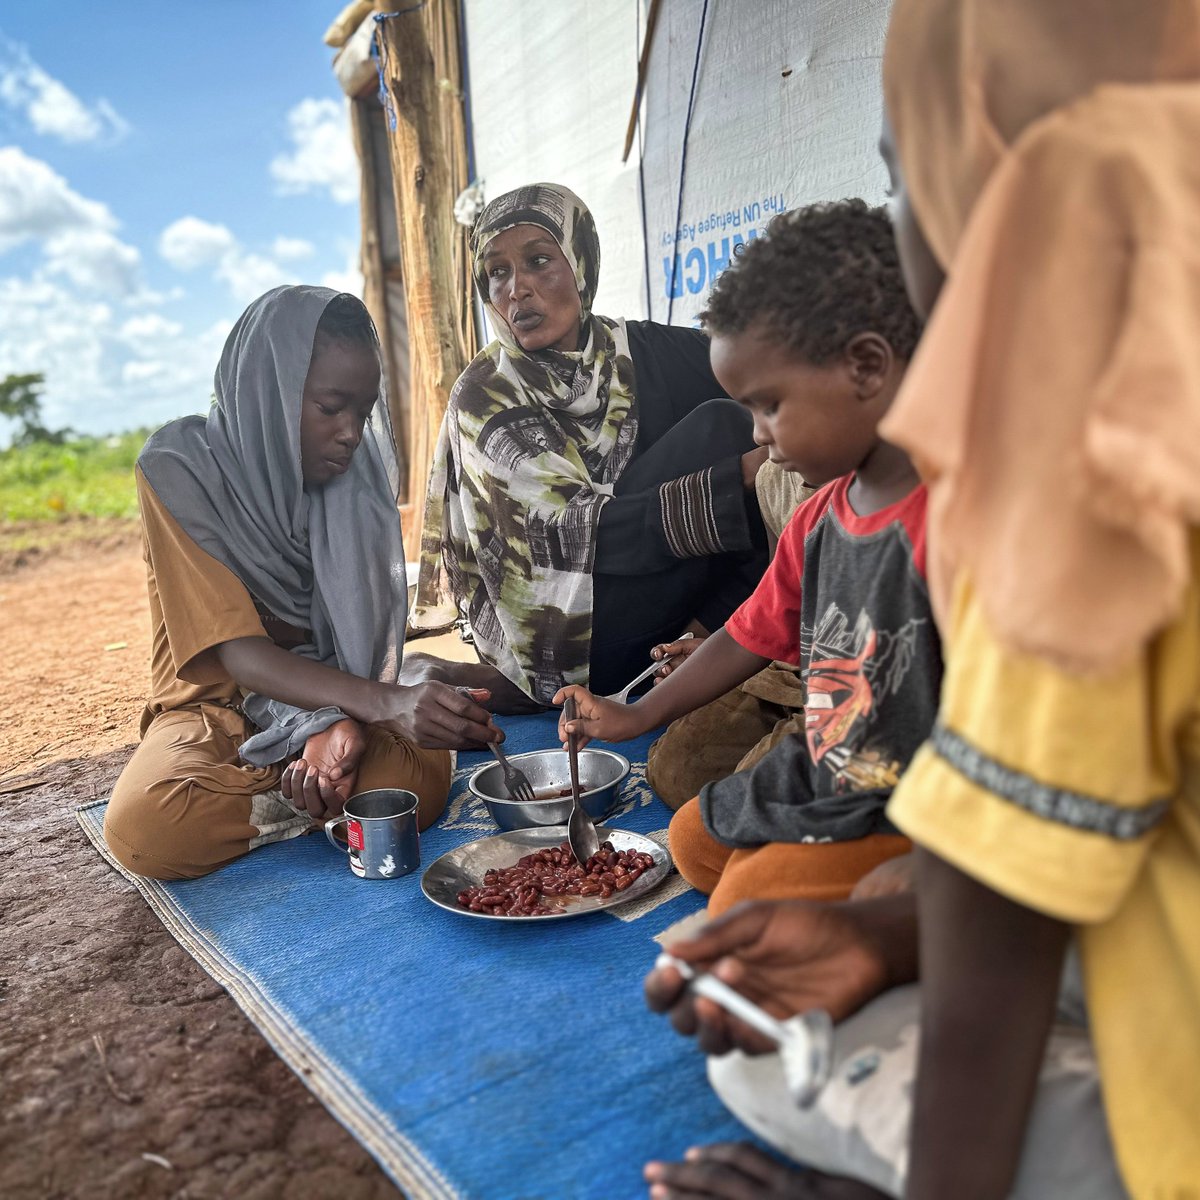 Aziza Saleh, once a social worker working for displaced people in #Sudan, is now a refugee in Kiryandongo, #Uganda. Displaced by the #SudanCrisis, Aziza relies on food rations to provide for her children.

#SudanCrisis